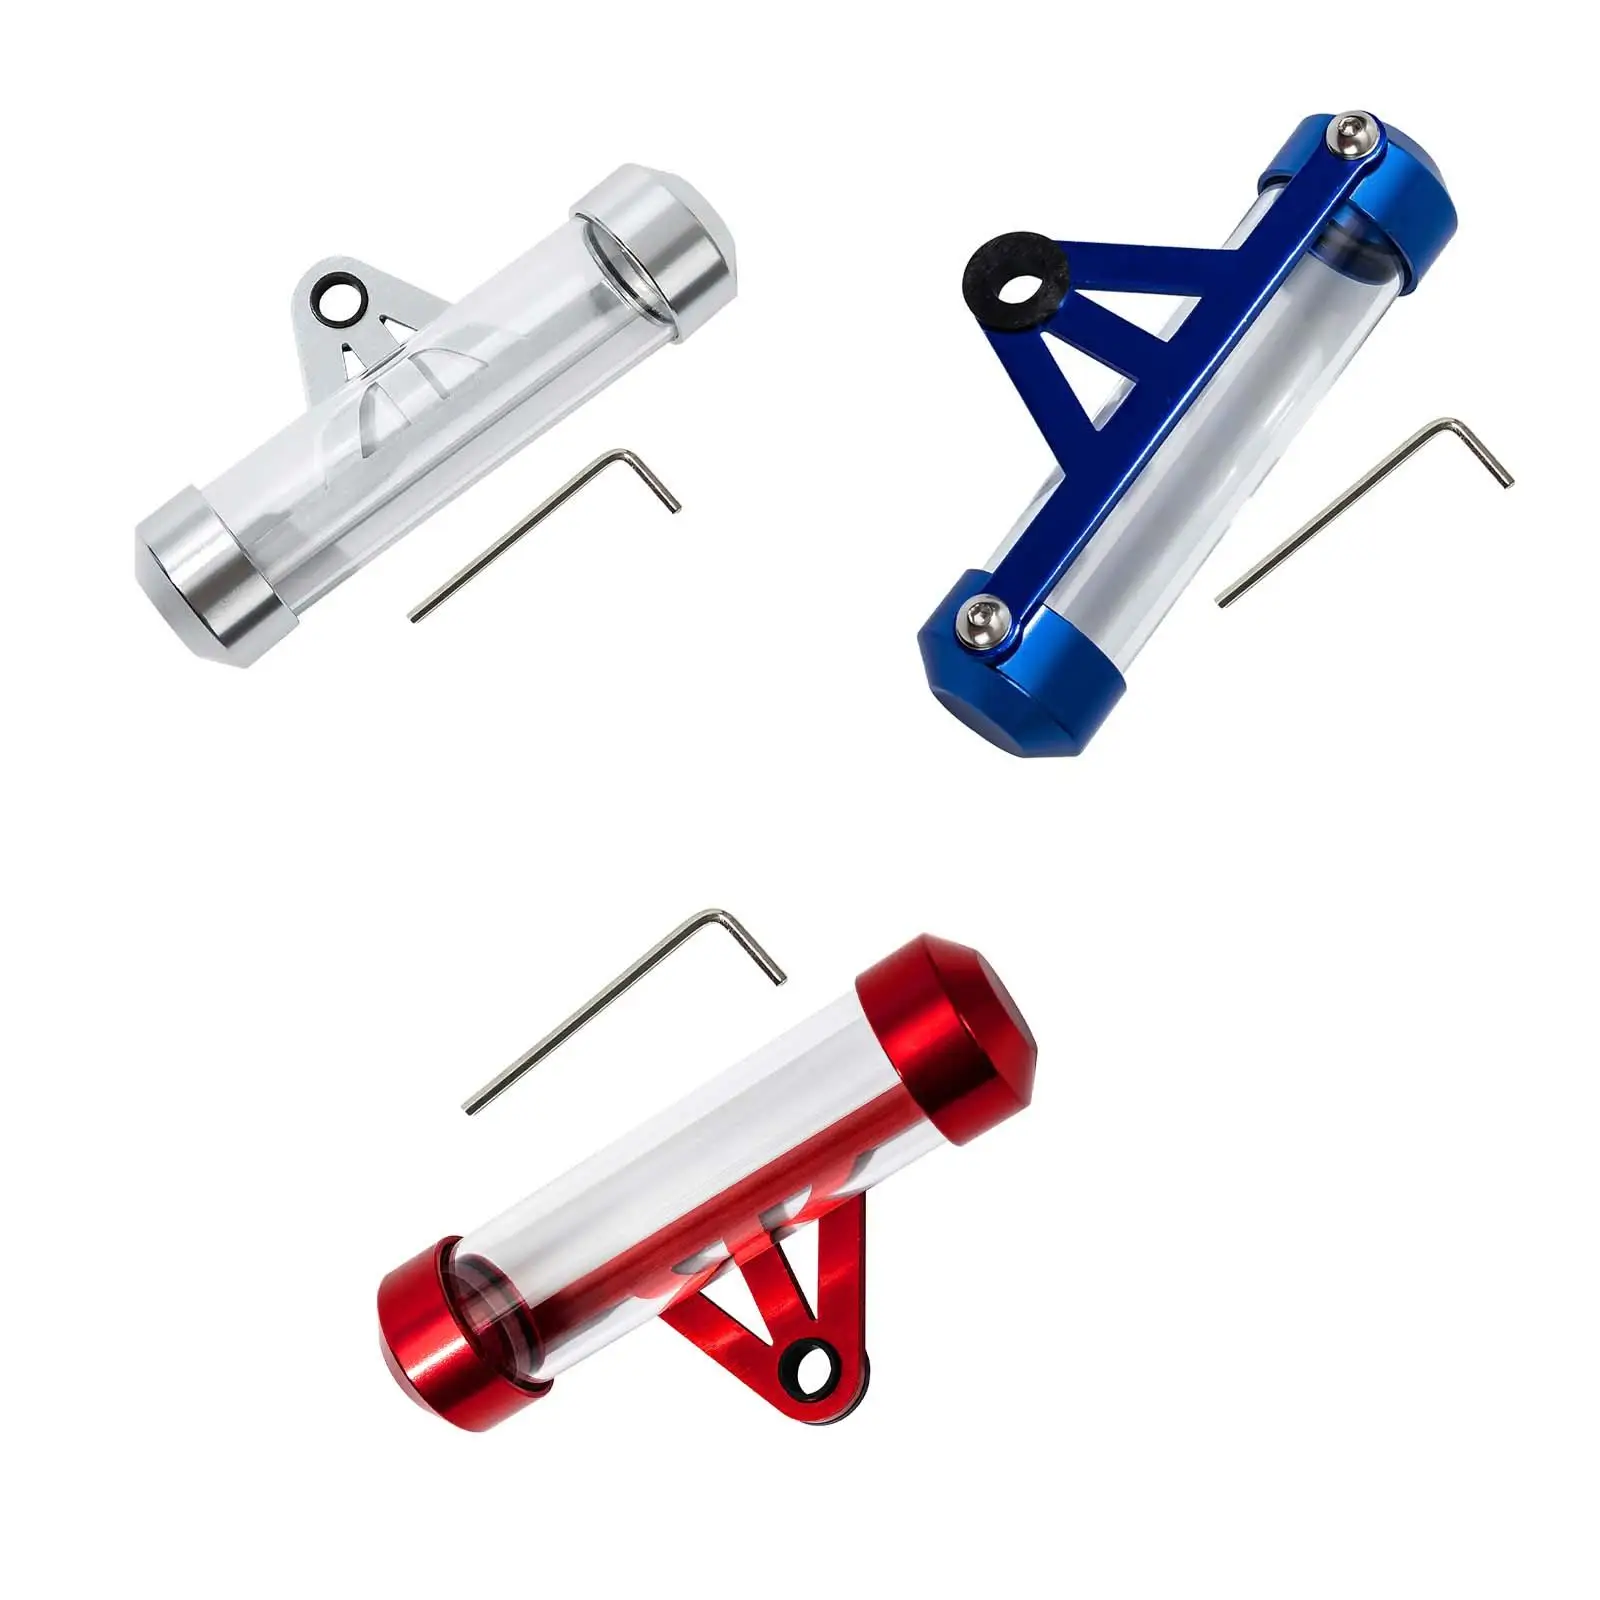 Universal Motorcycle Secure Tax Tube Holder Made of Aluminium Alloy and Glass Pratical Multifunctional Motorbike Accessories